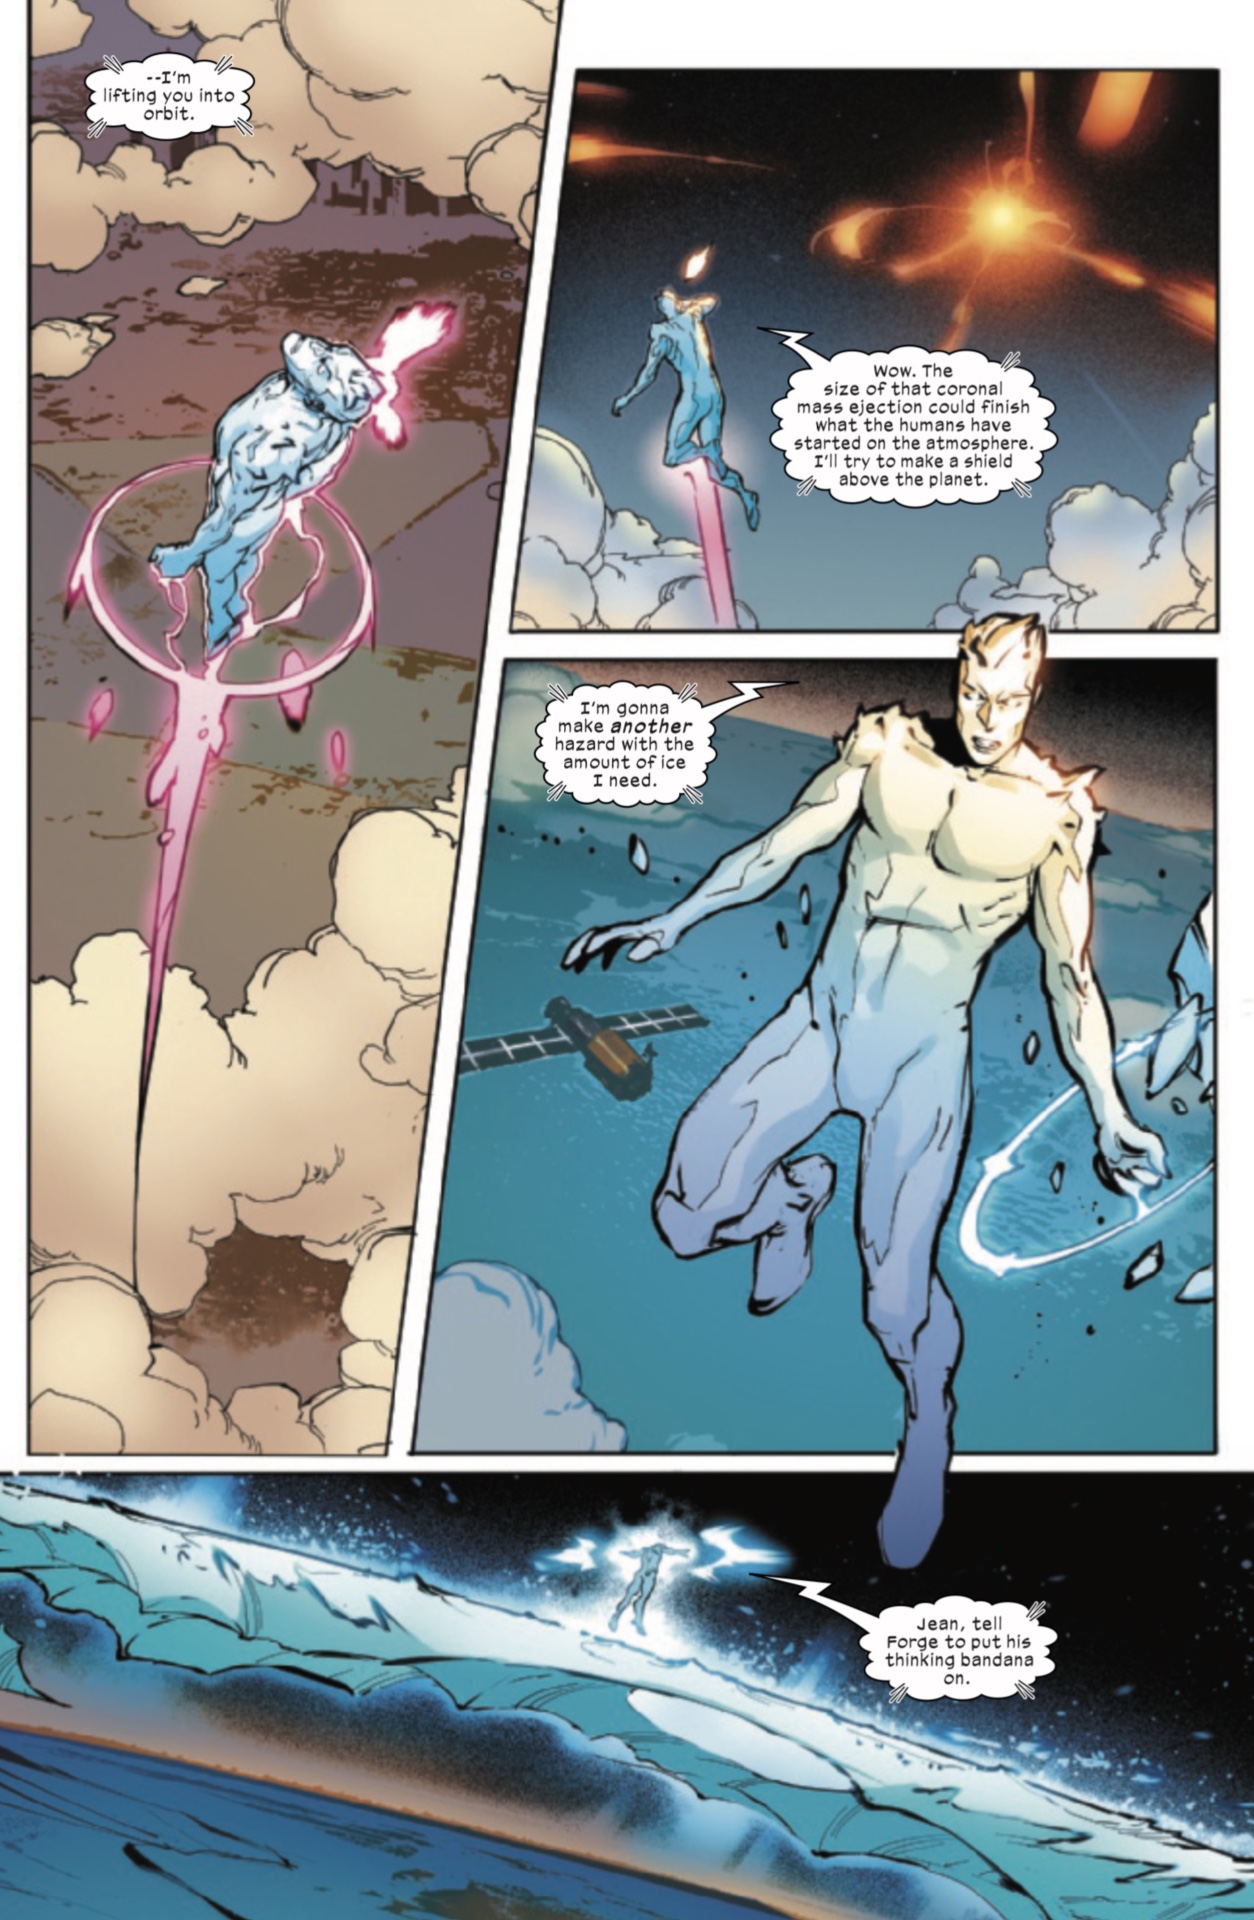 Would you like for Iceman to get more love in the X-men stories as